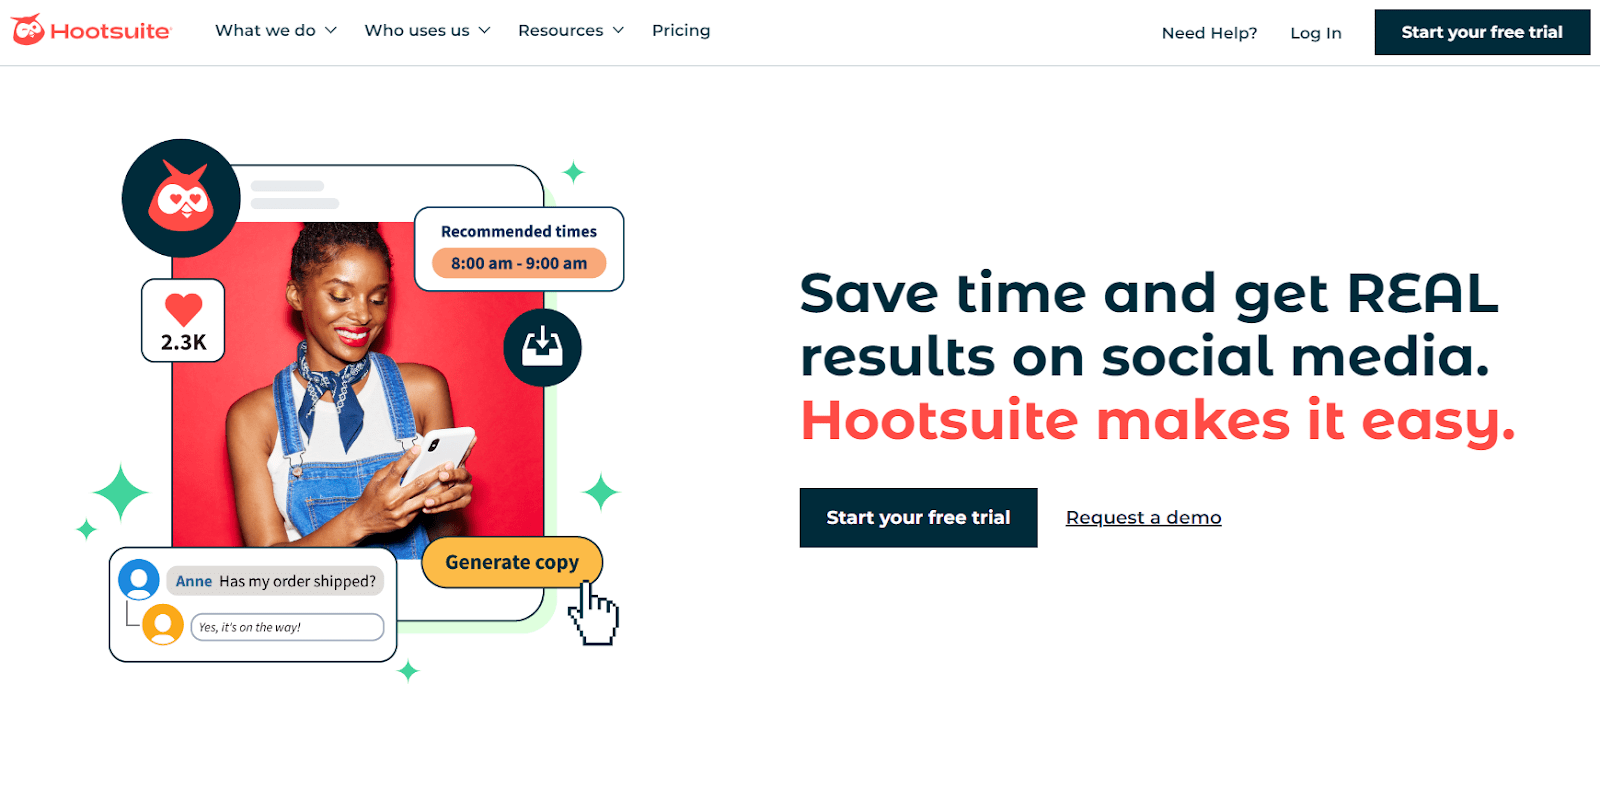 hootsuite website - save time and get real results on social media